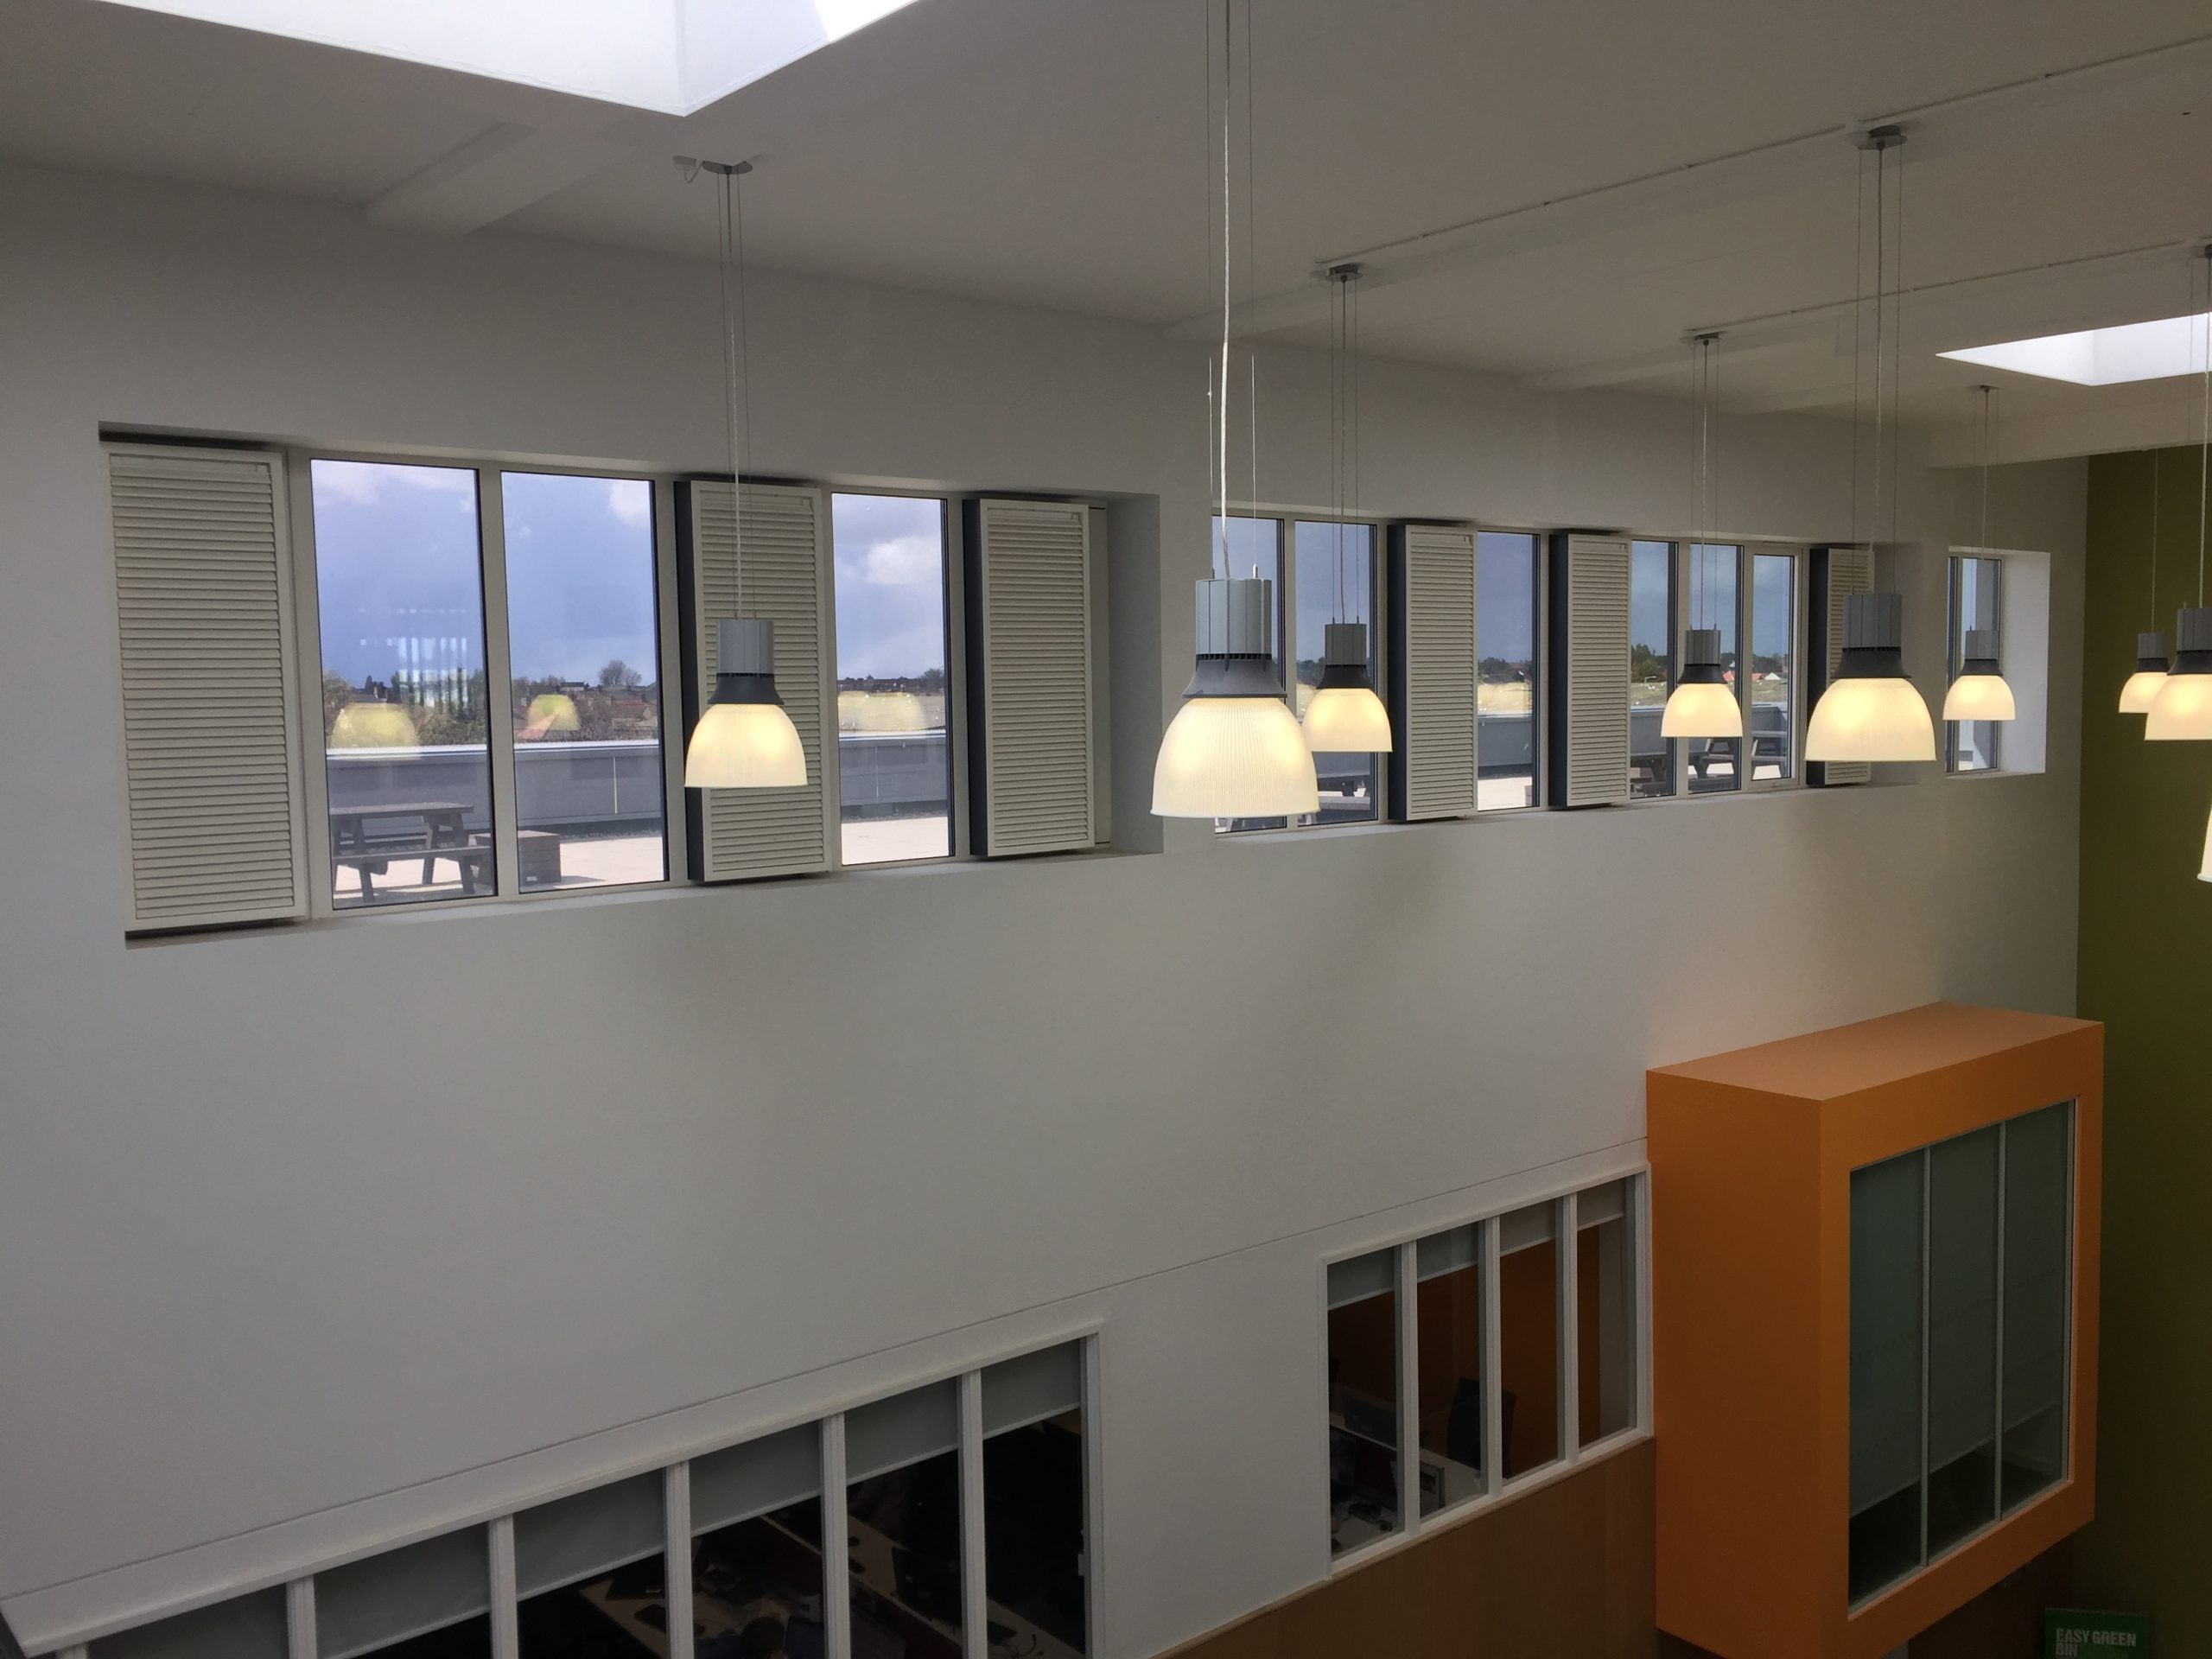 Neutral appearance, solar control and privacy window film